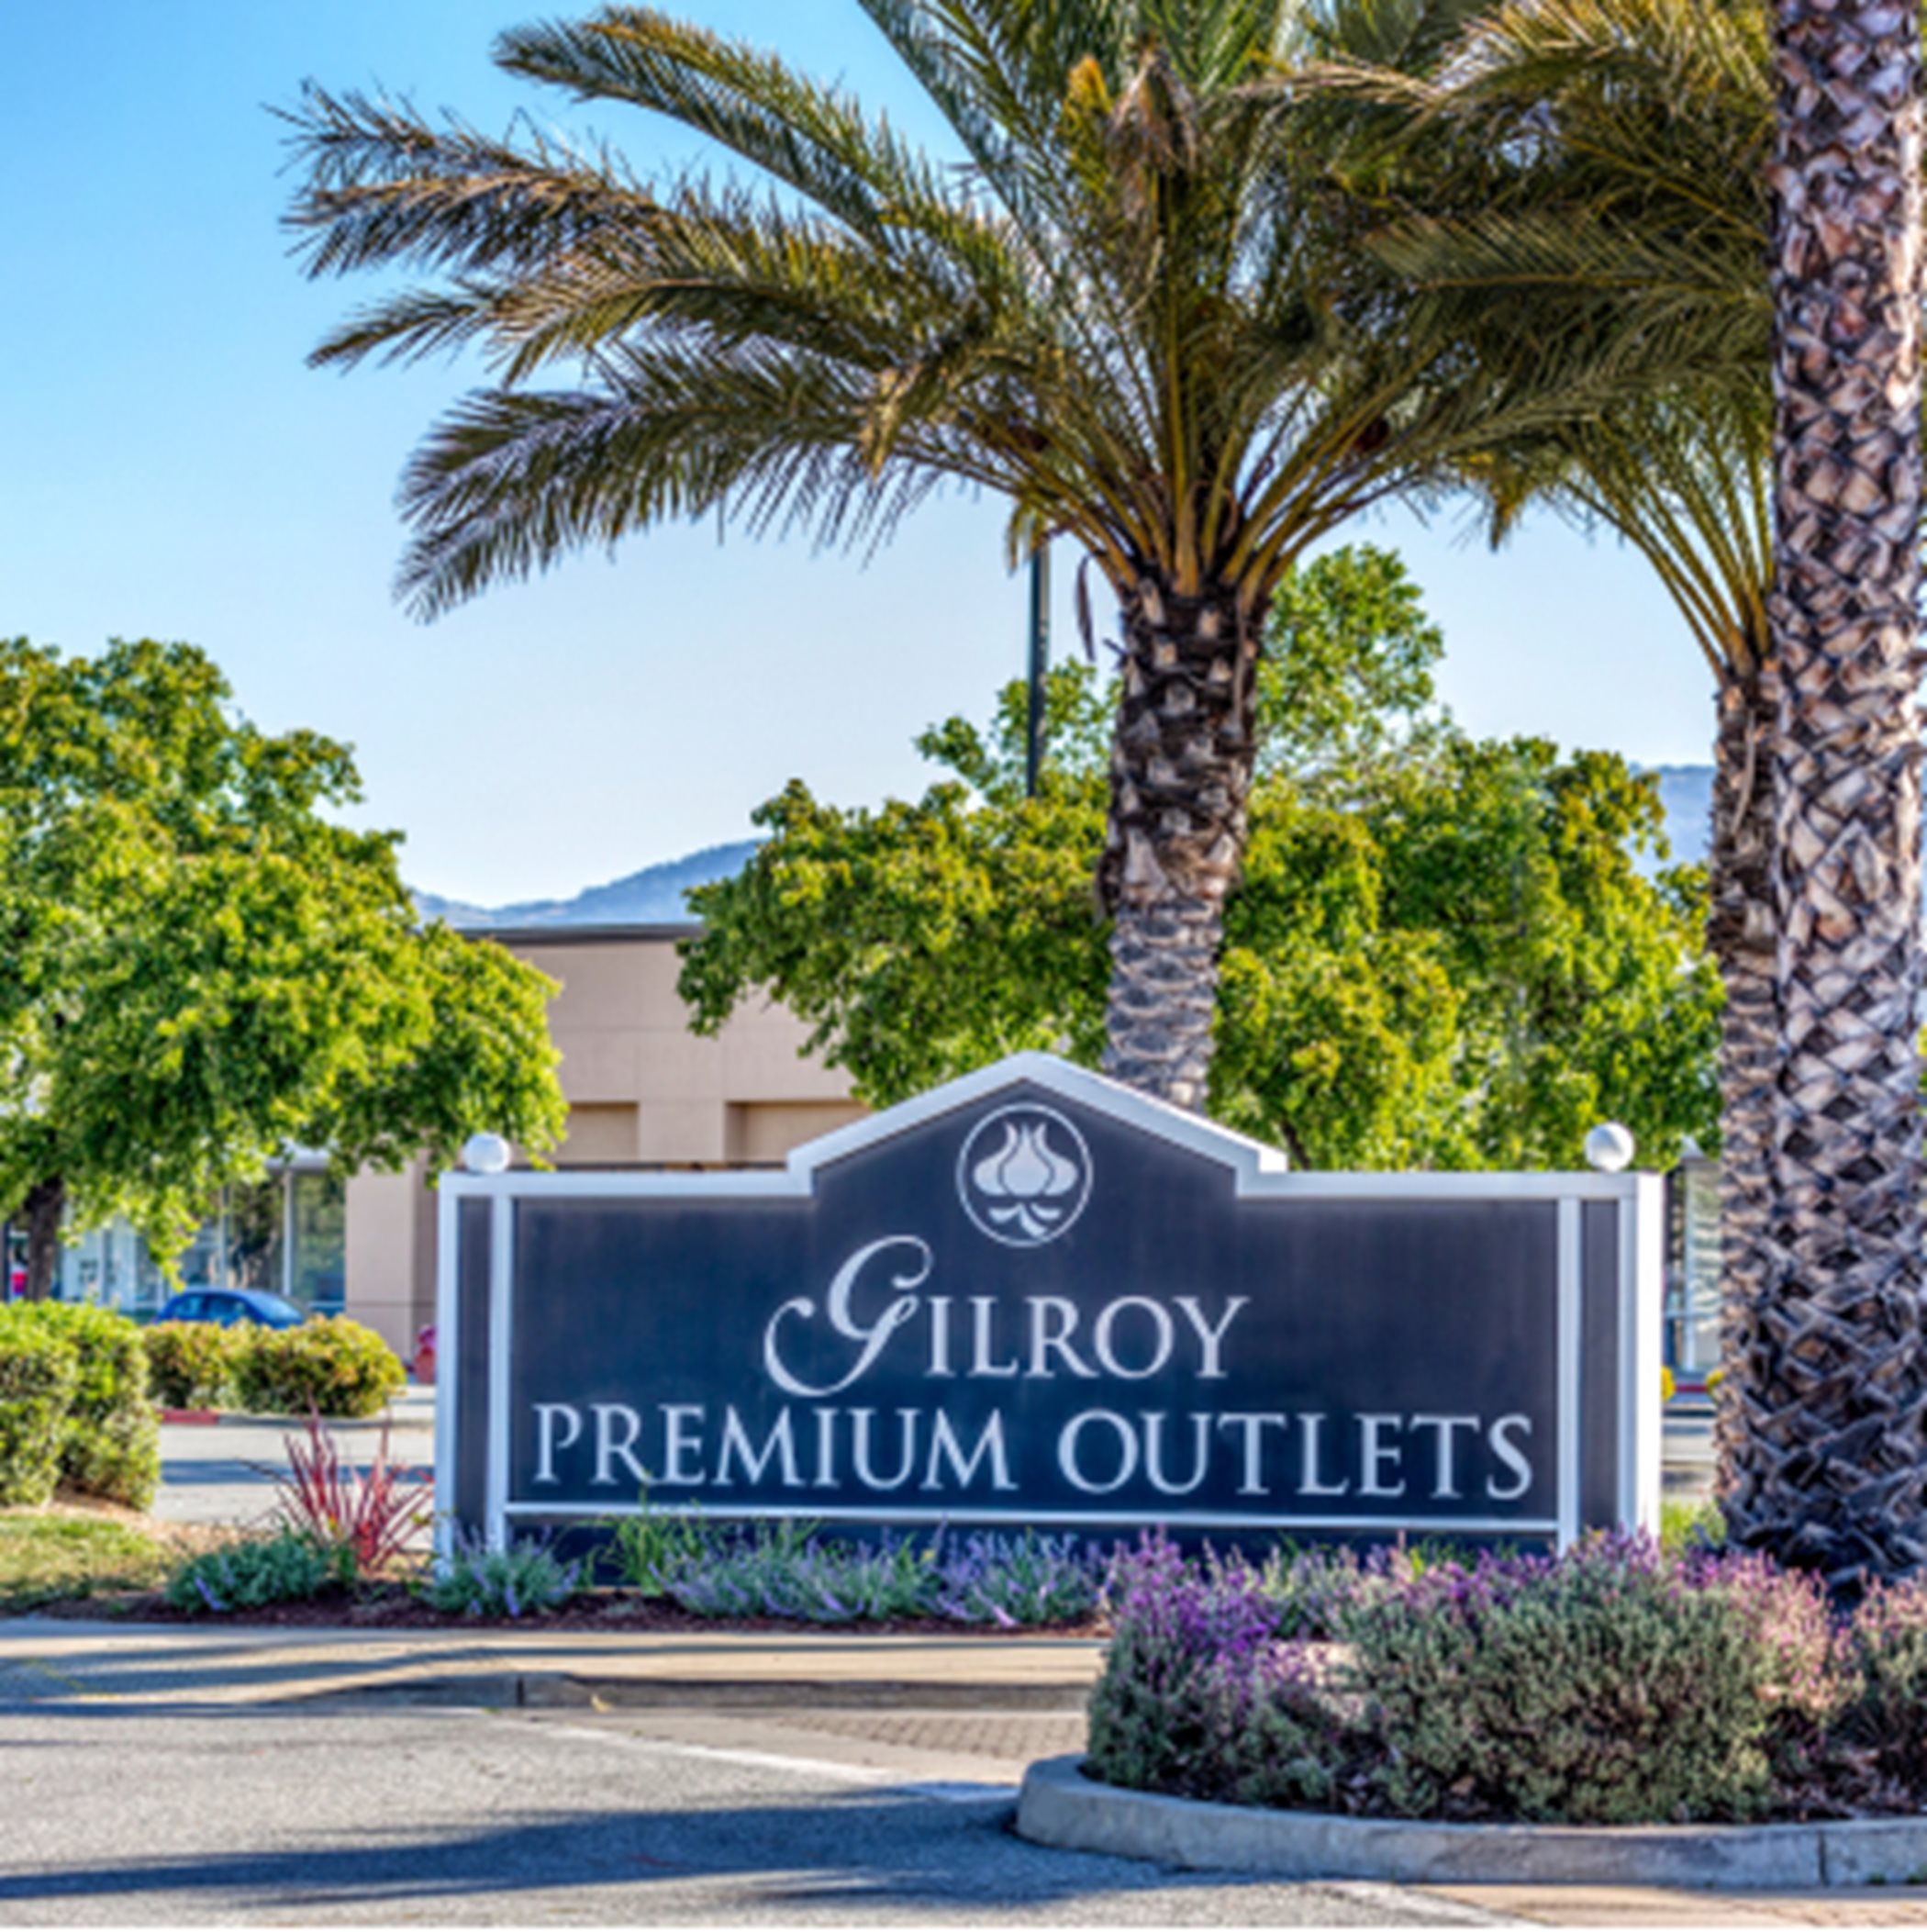 Gilroy Premium Outlets 